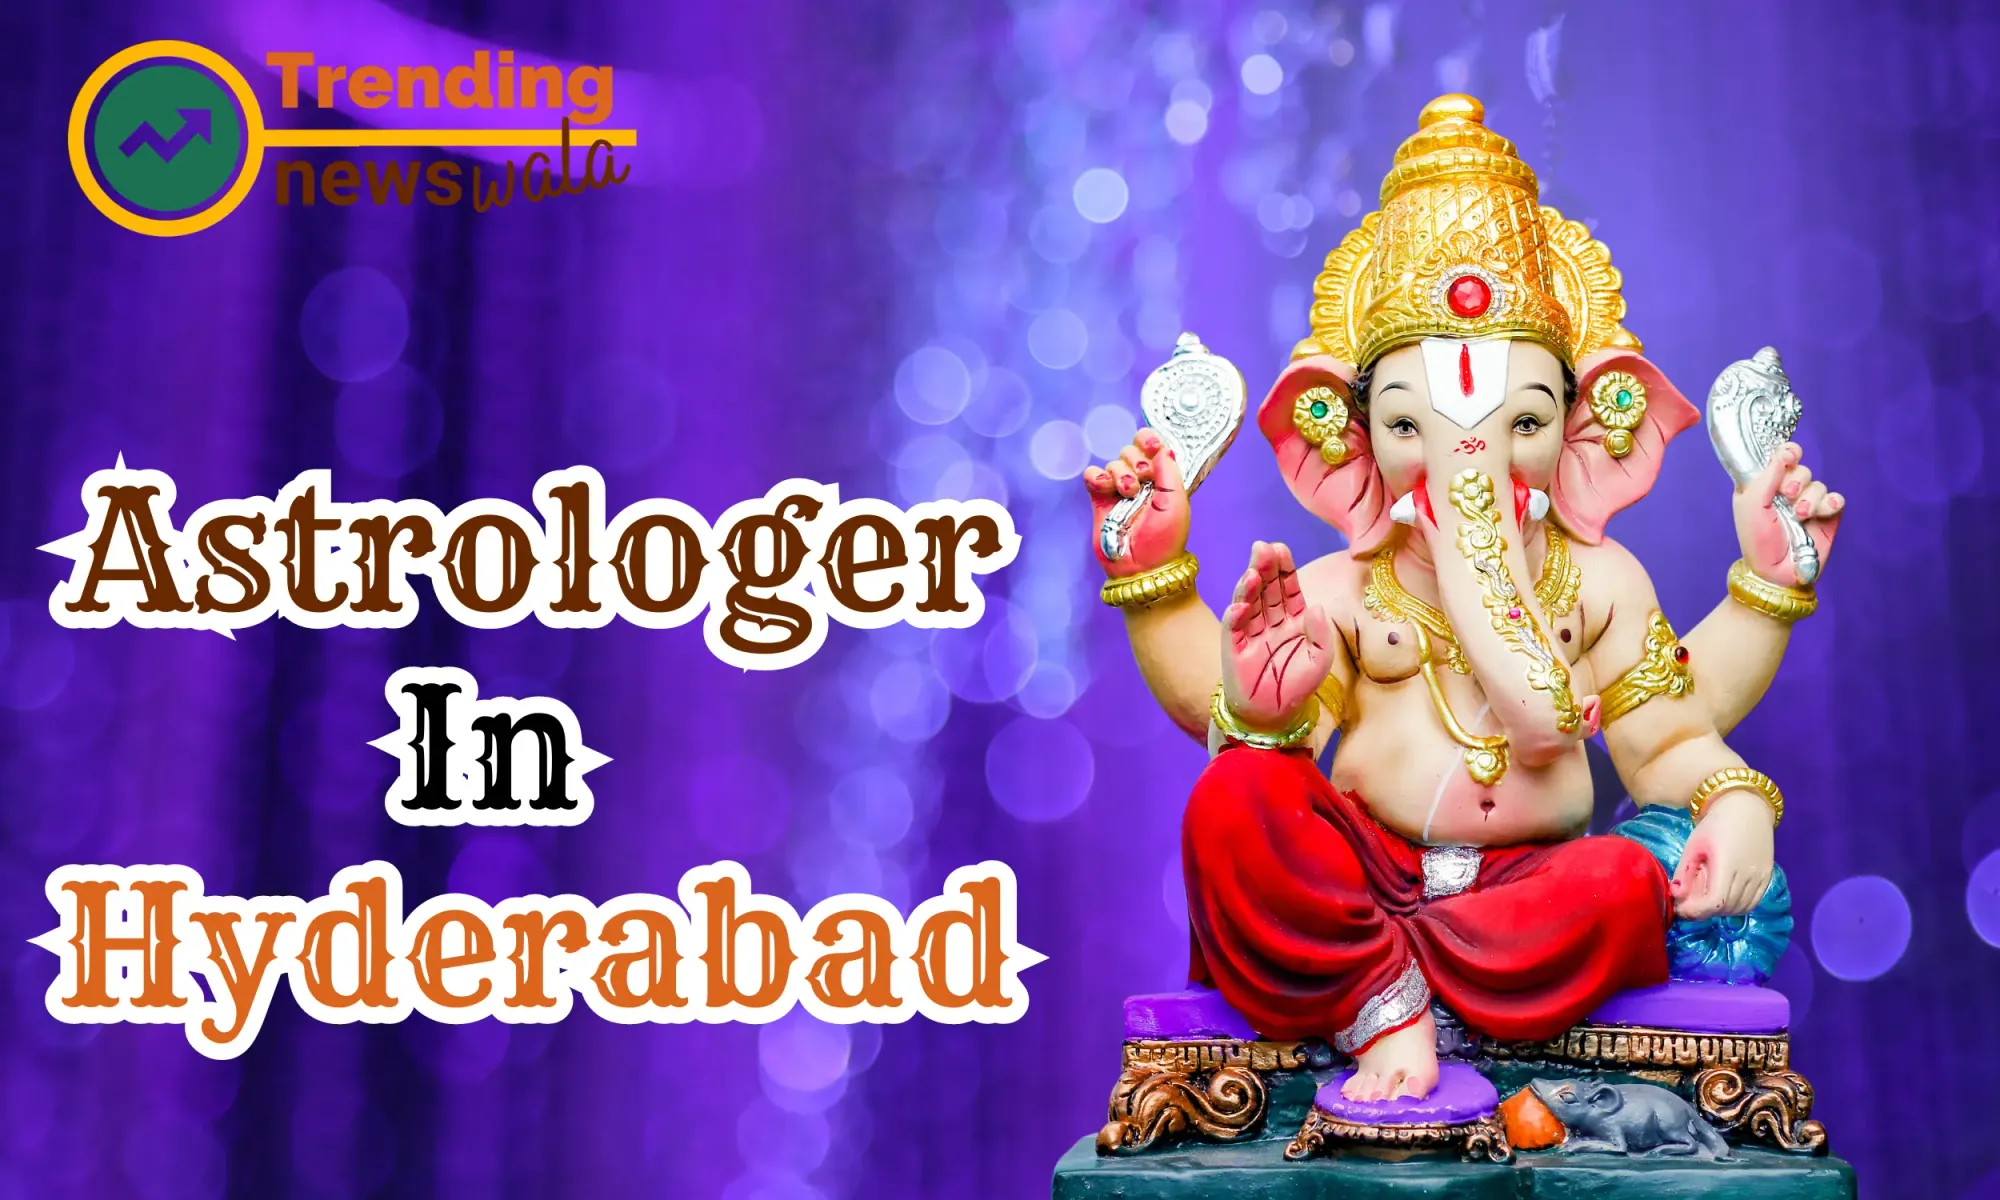 Famous Astrologer In Hyderabad